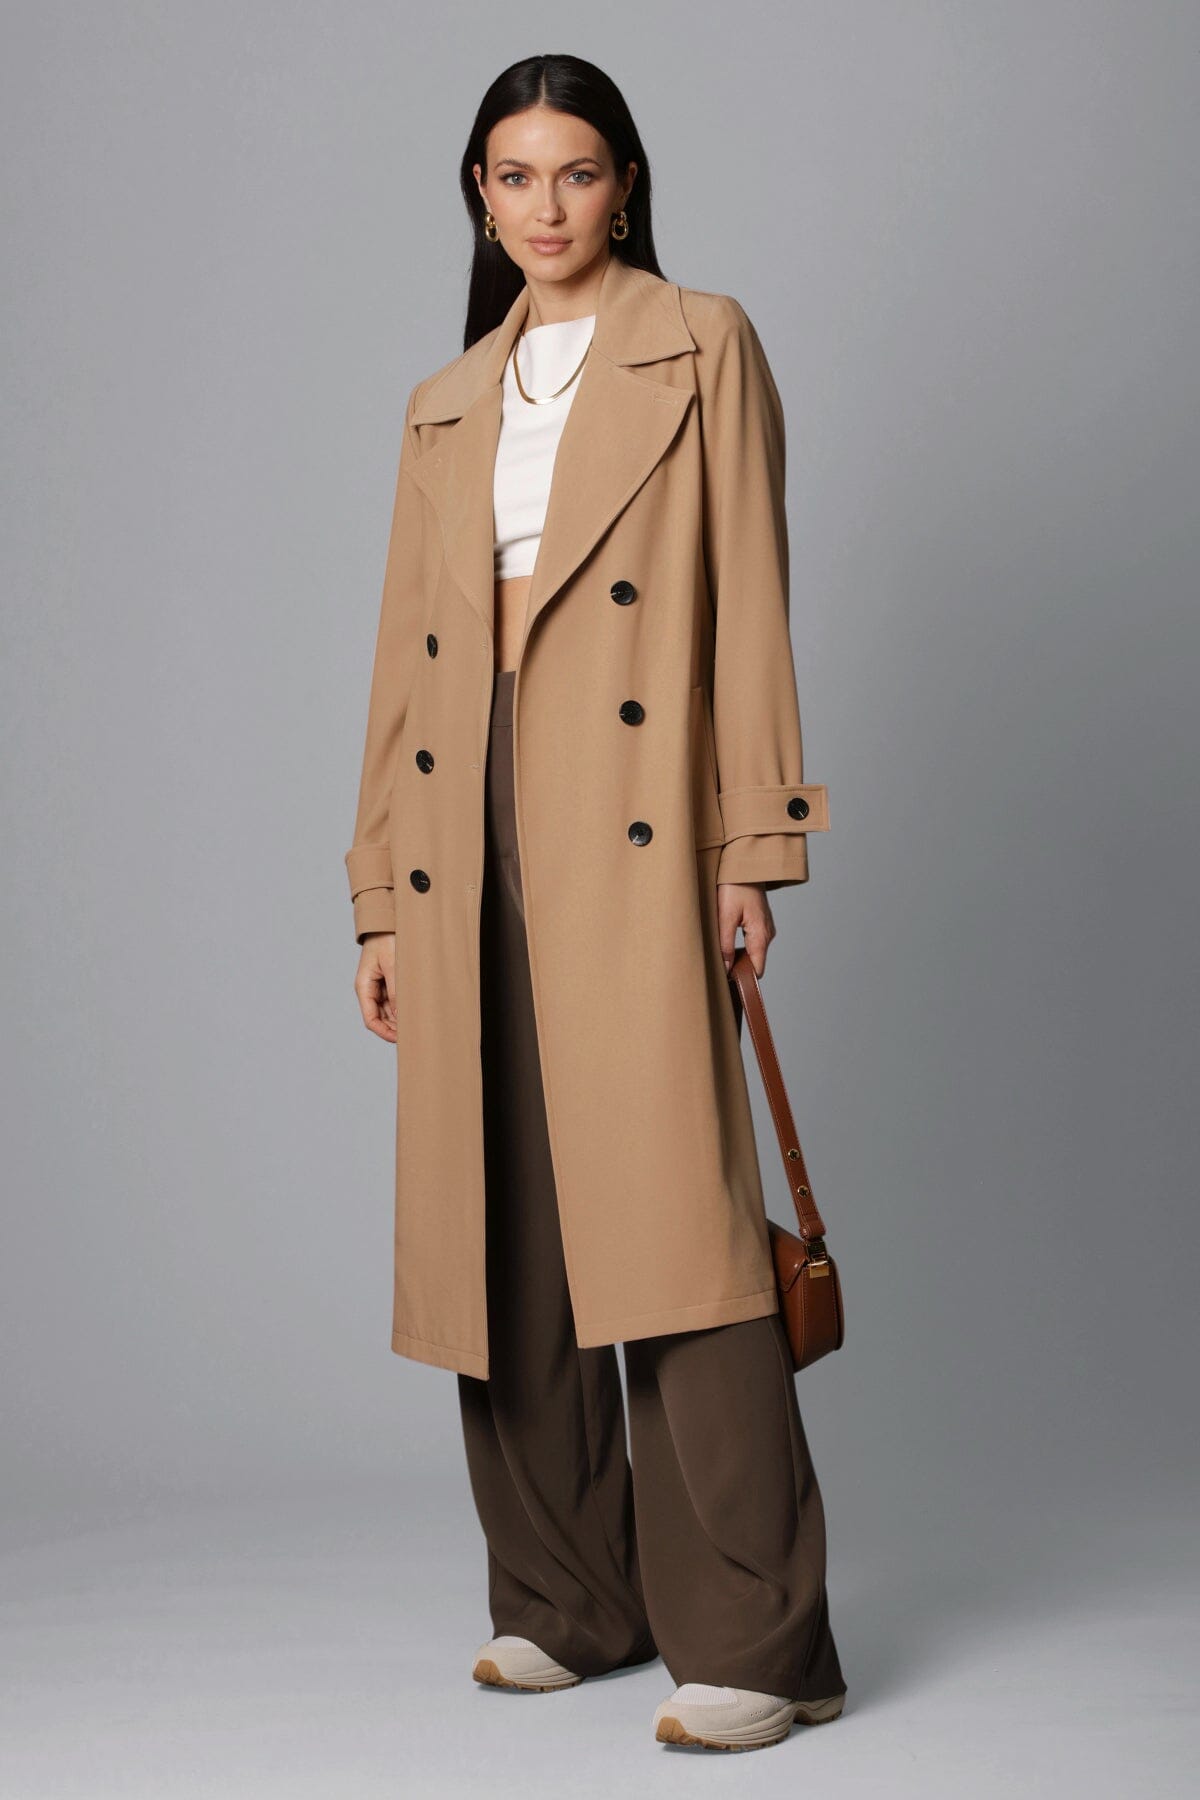 double breasted relaxed stretch crepe duster long trench coat khaki beige - figure flattering designer fashion day to night long coats outerwear for women